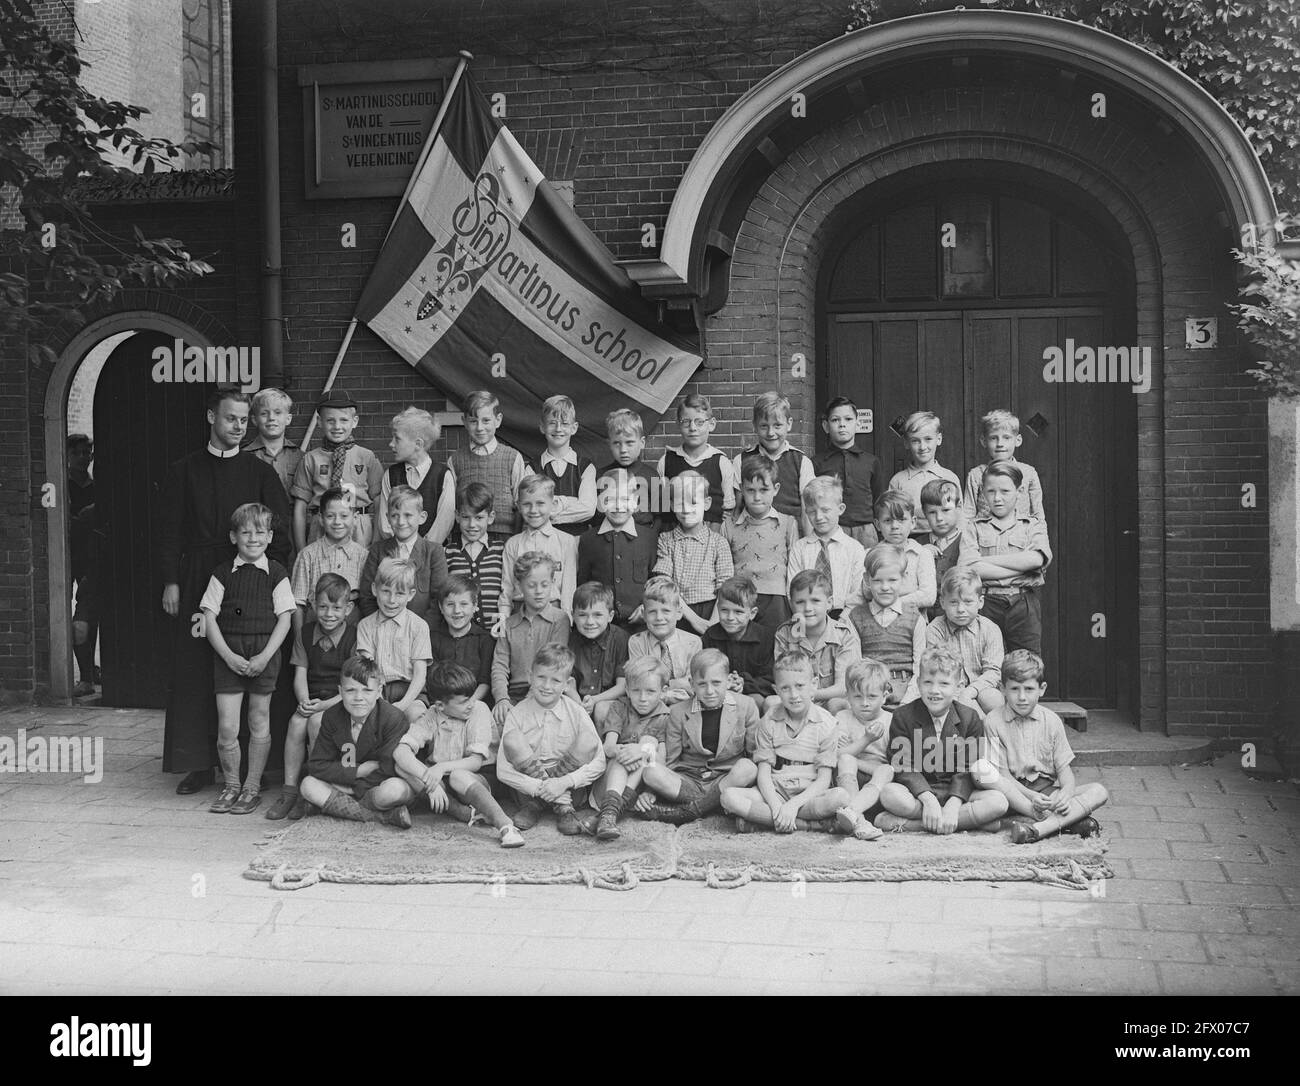 School Servaes Noutstraat Saint Martinus School, July 6, 1949, SCHOOL, The Netherlands, 20th century press agency photo, news to remember, documentary, historic photography 1945-1990, visual stories, human history of the Twentieth Century, capturing moments in time Stock Photo